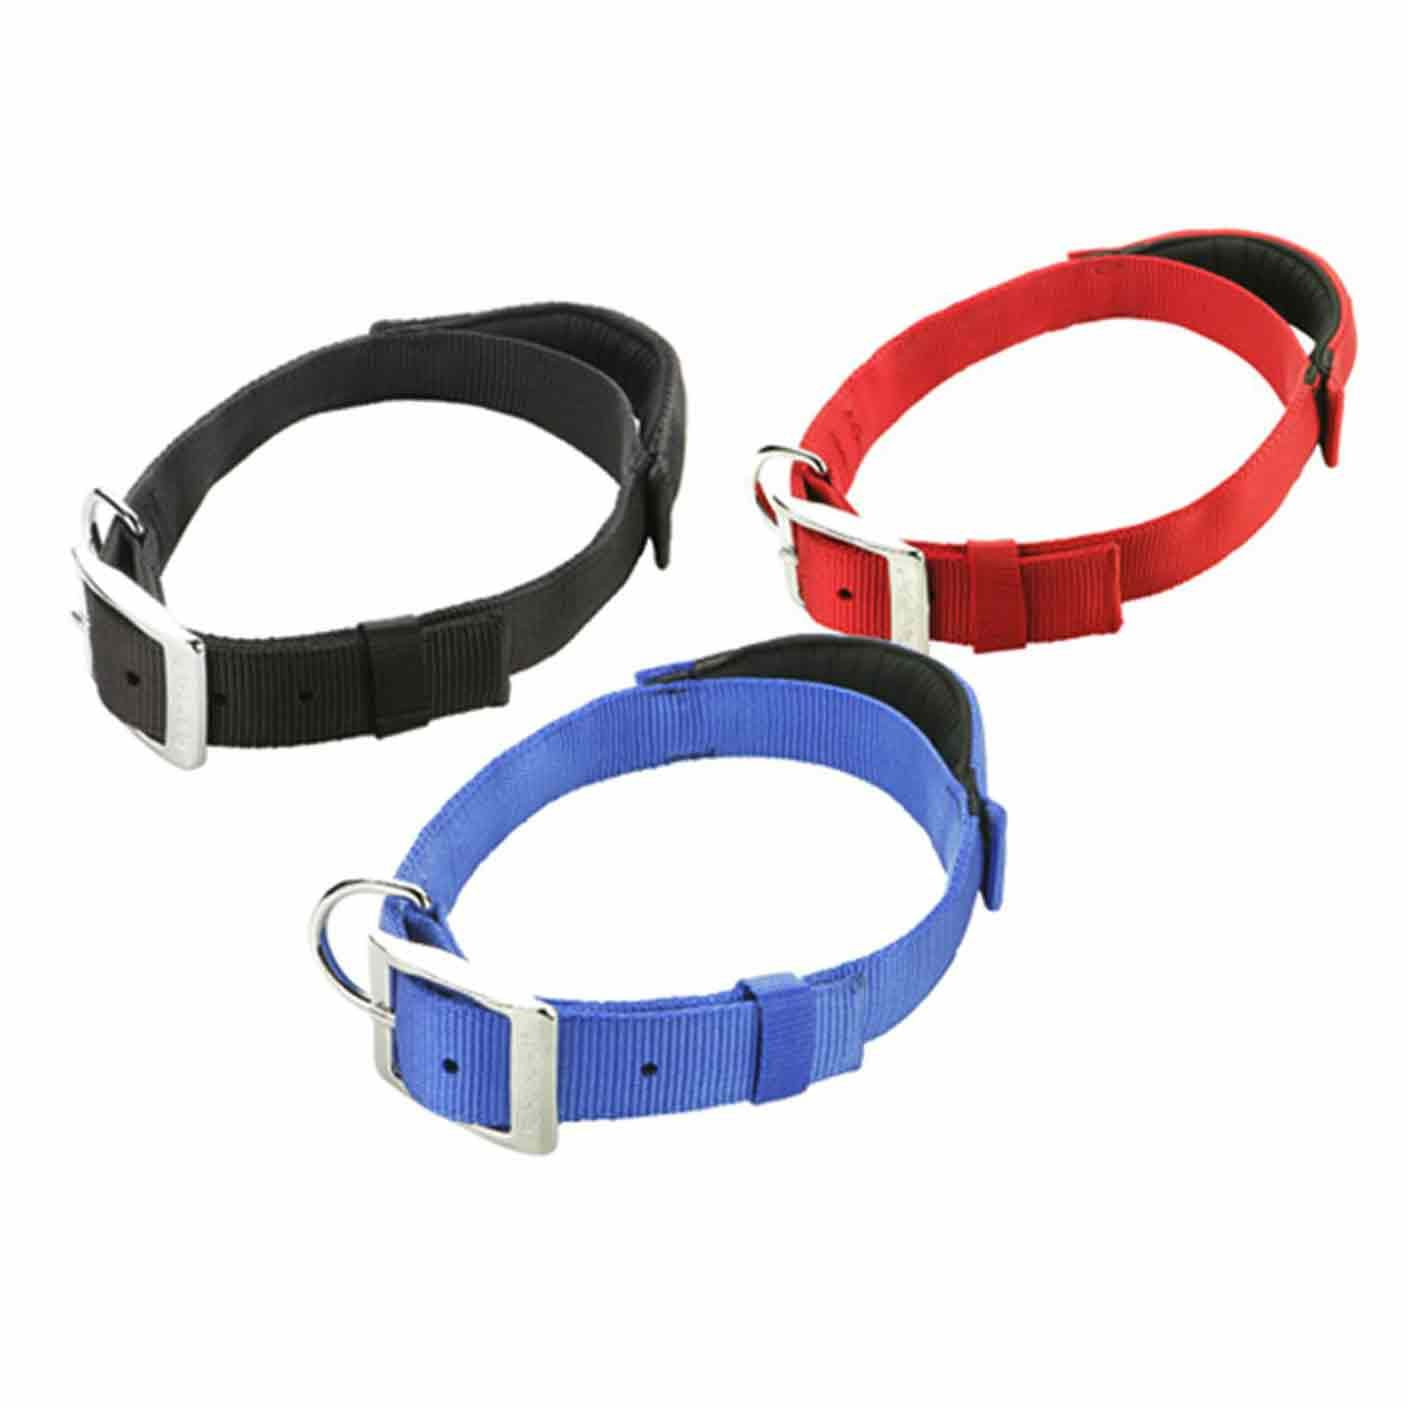 Simple and Functional: Basic Dog Collar